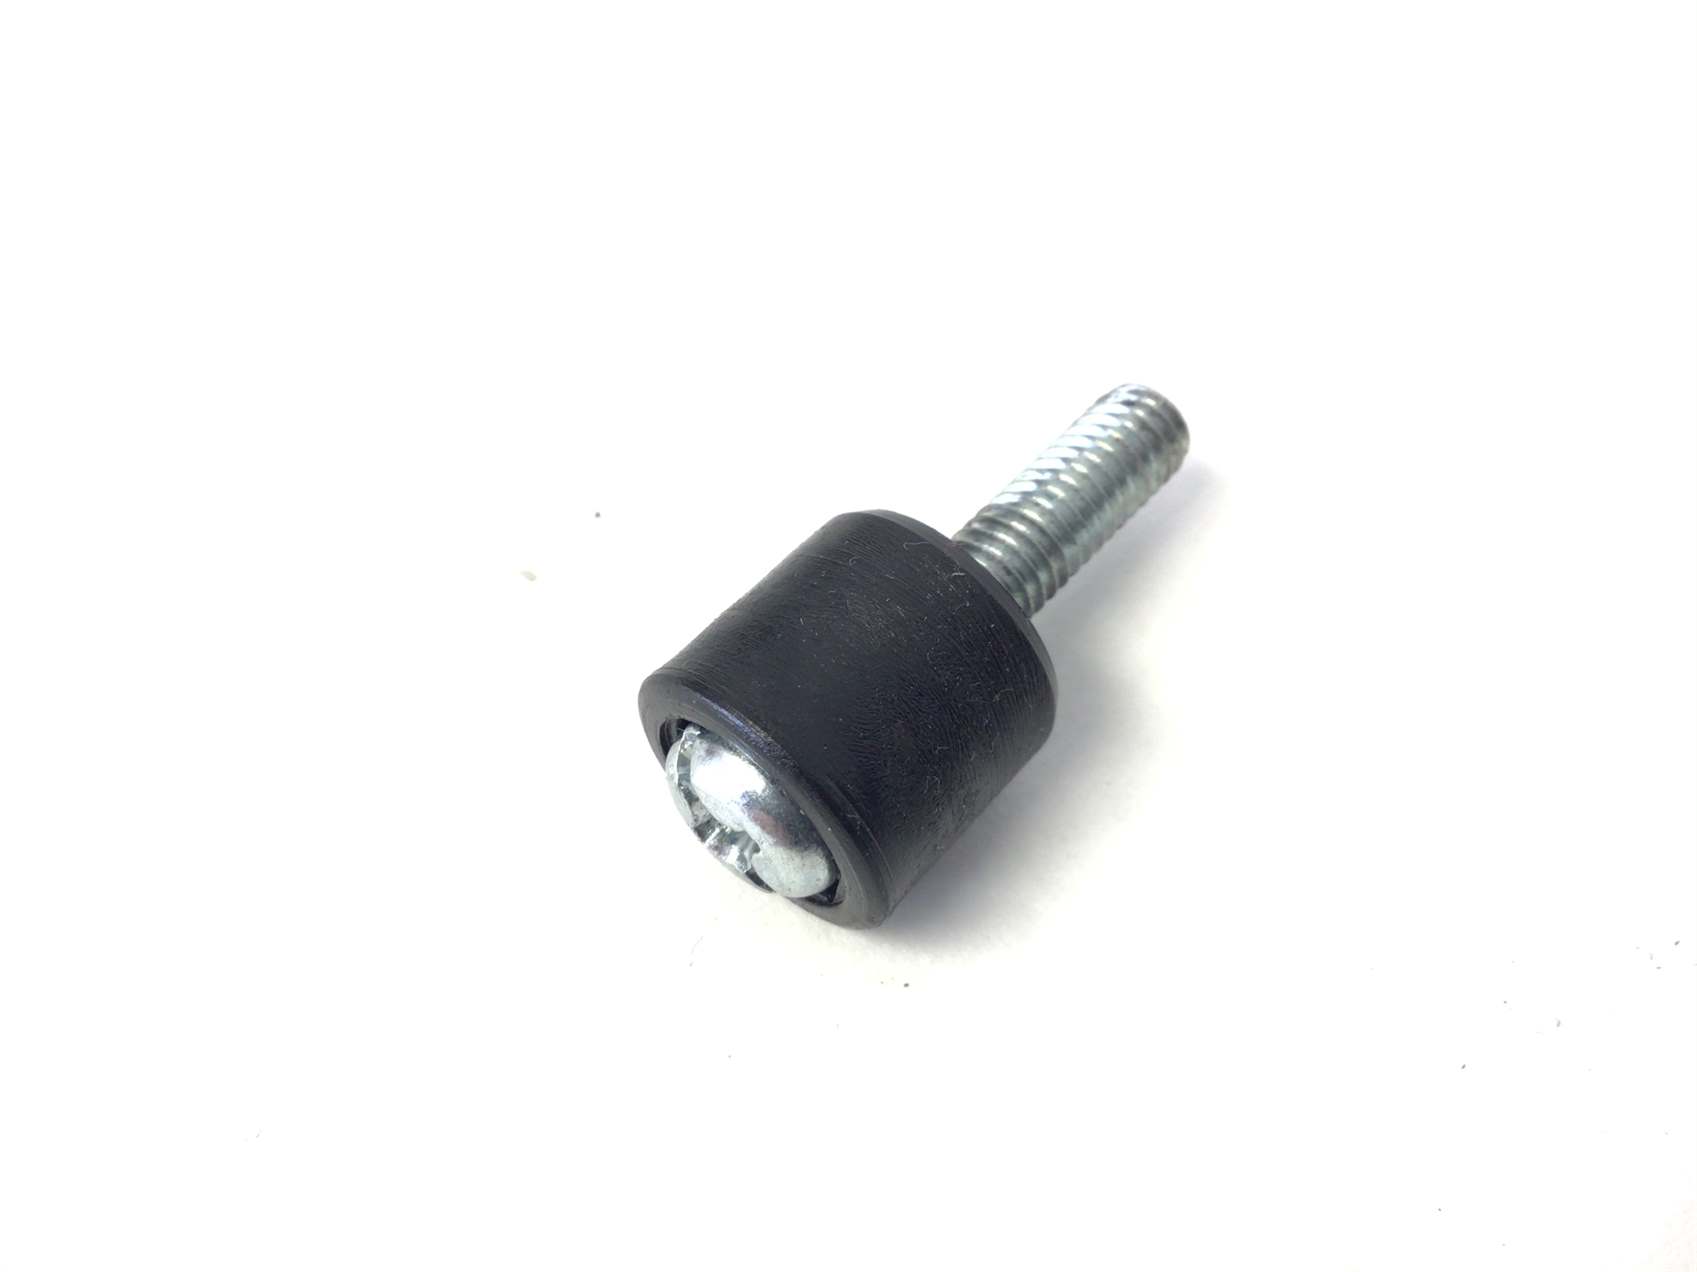 End Cap Screw With Plastic Spacer Bushing (Used)